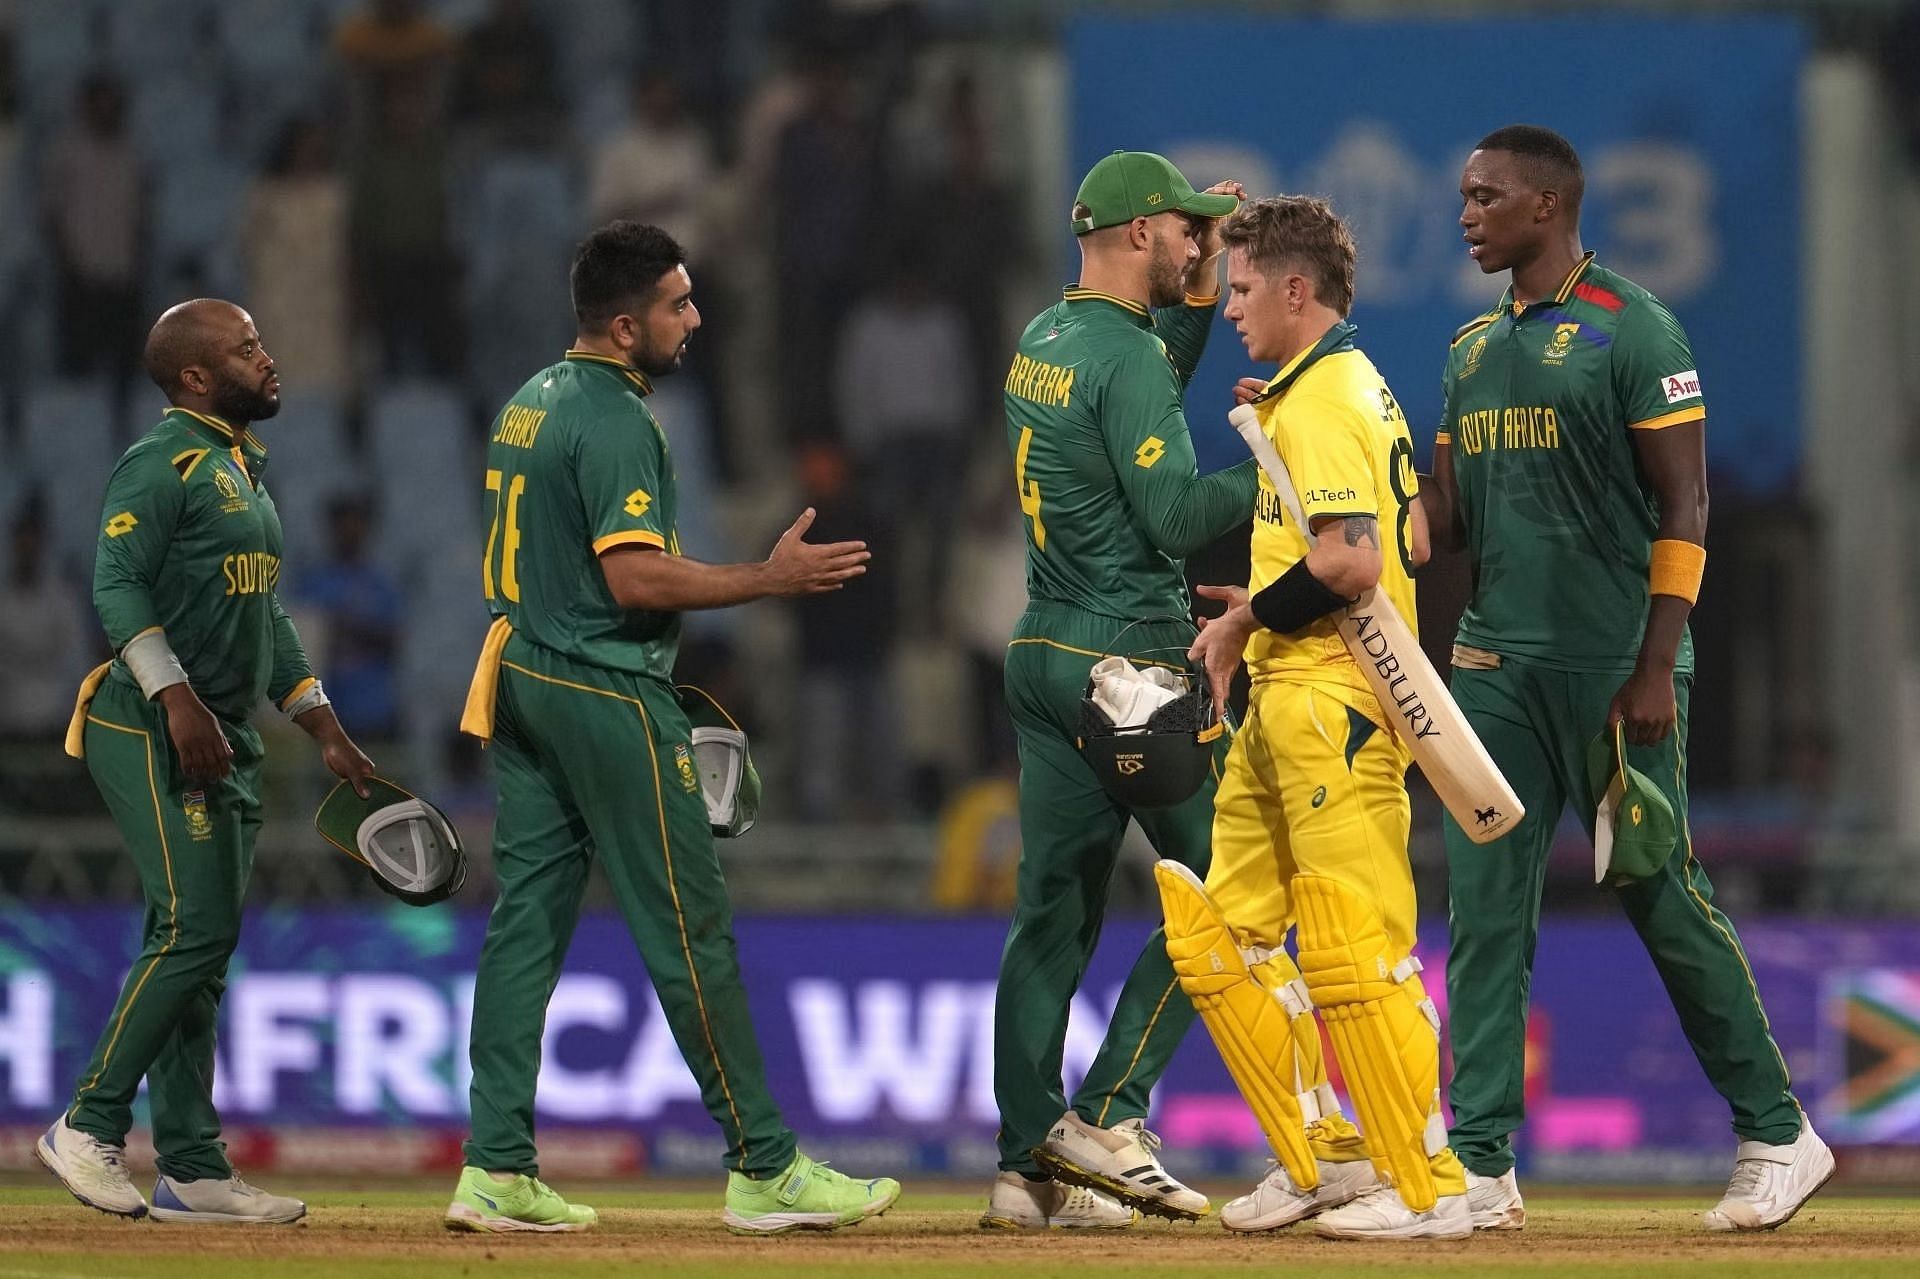 South Africa defeated Australia convincingly in the league phase. [P/C: AP]